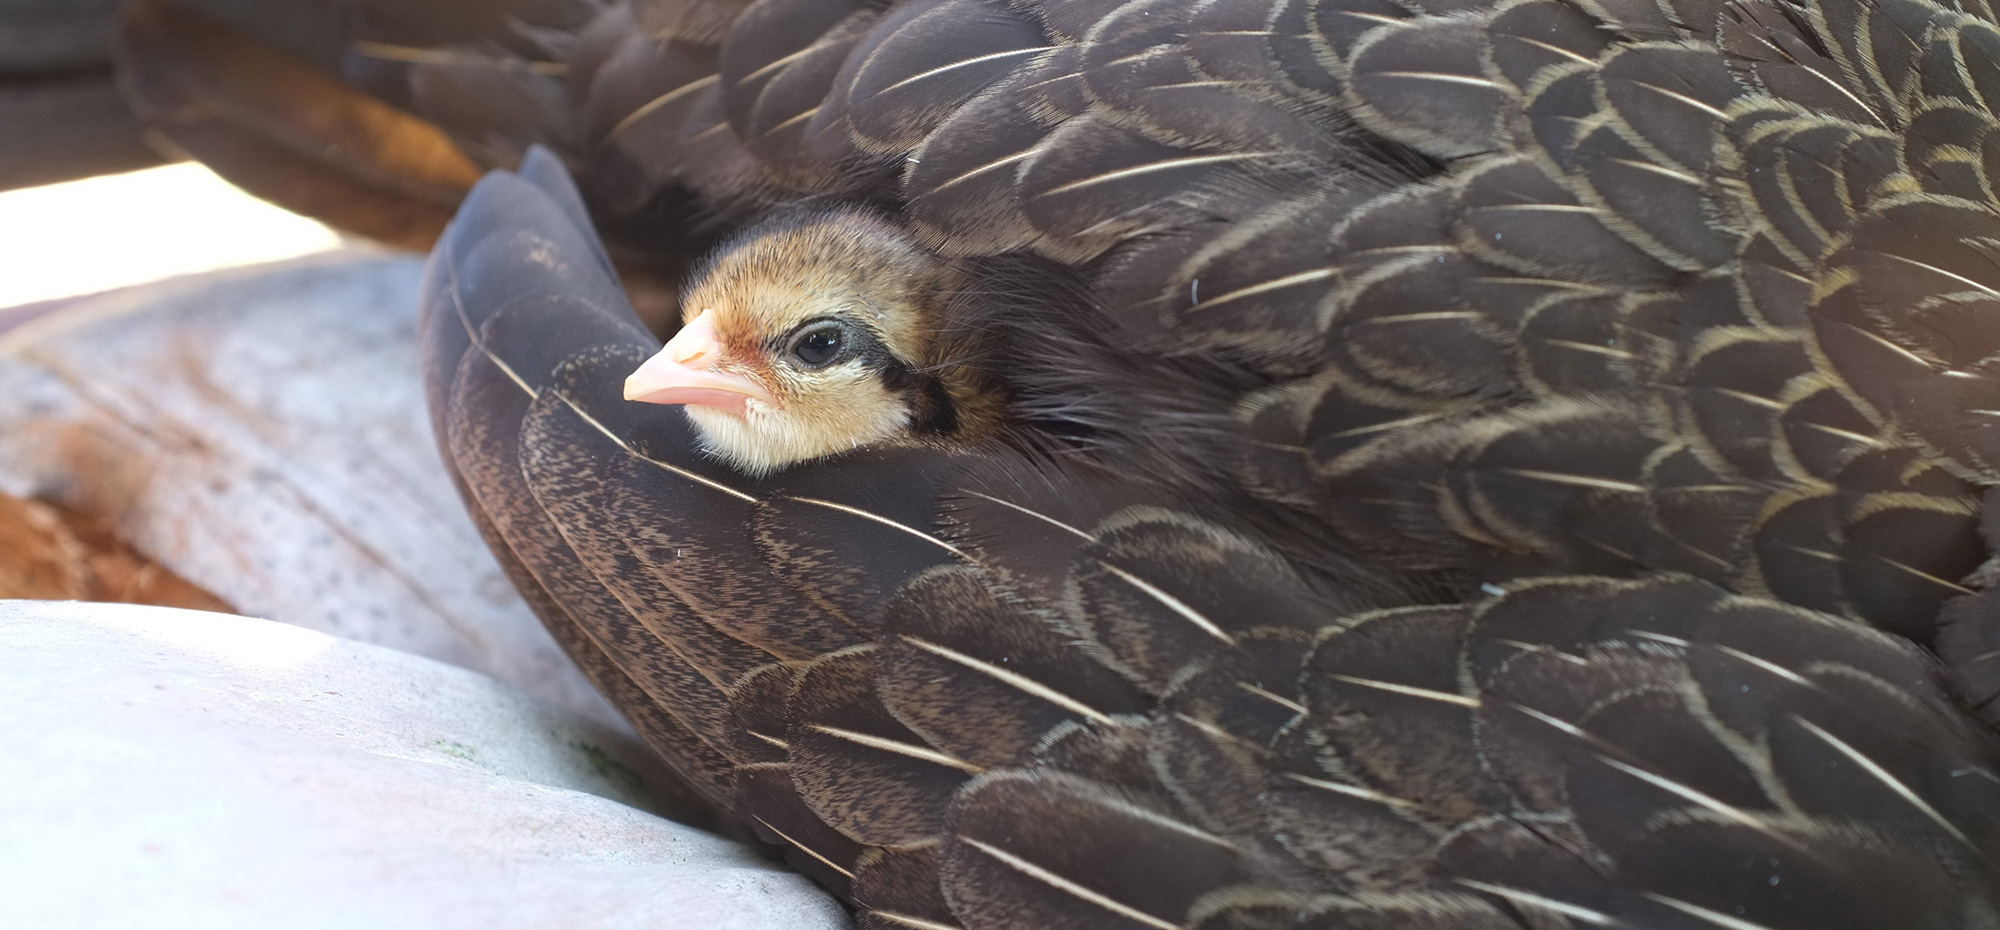 A chick pokes its head out of the wing feathers of a hen